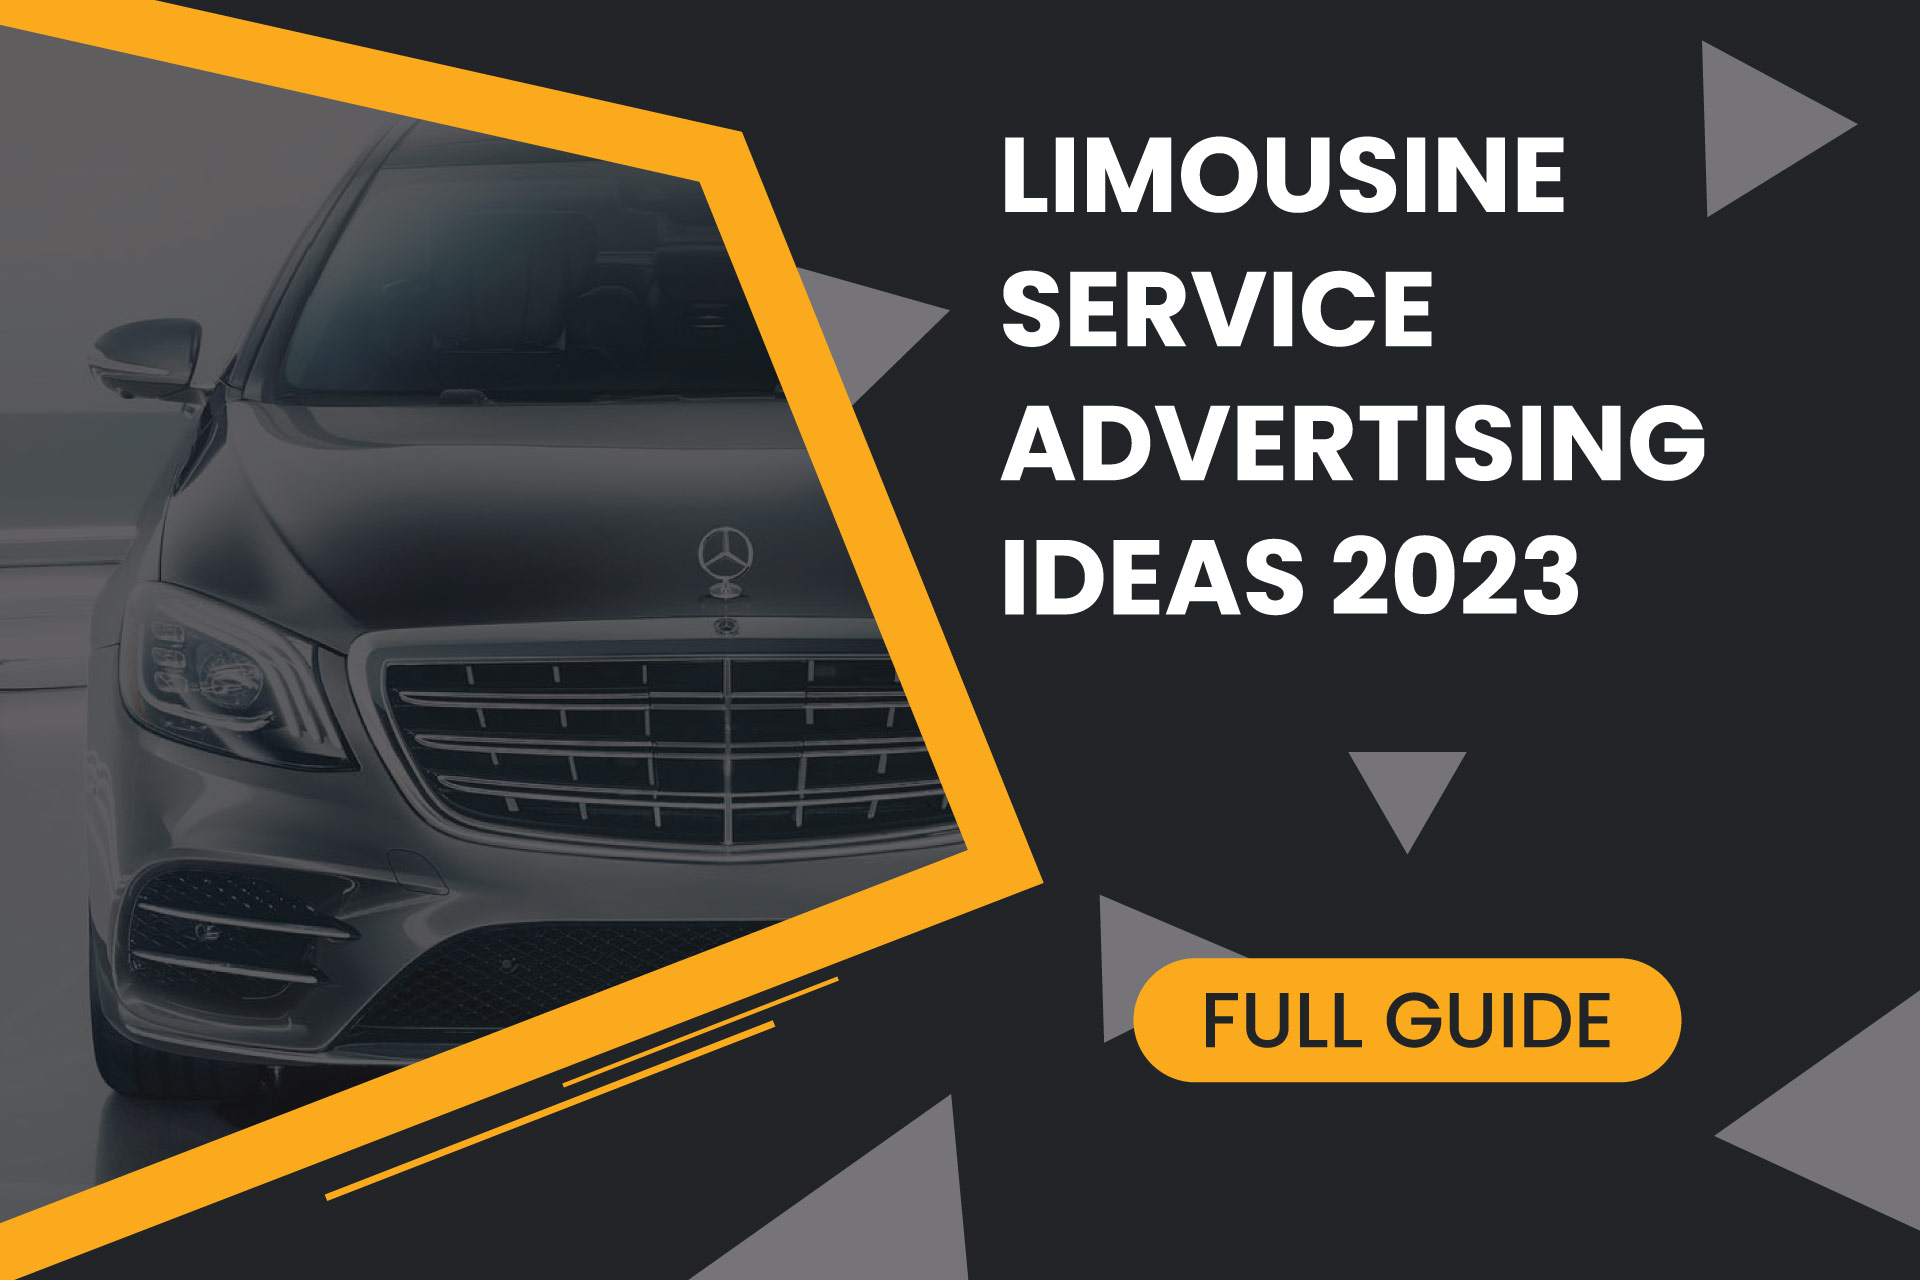 How to Advertise for Limo Service?